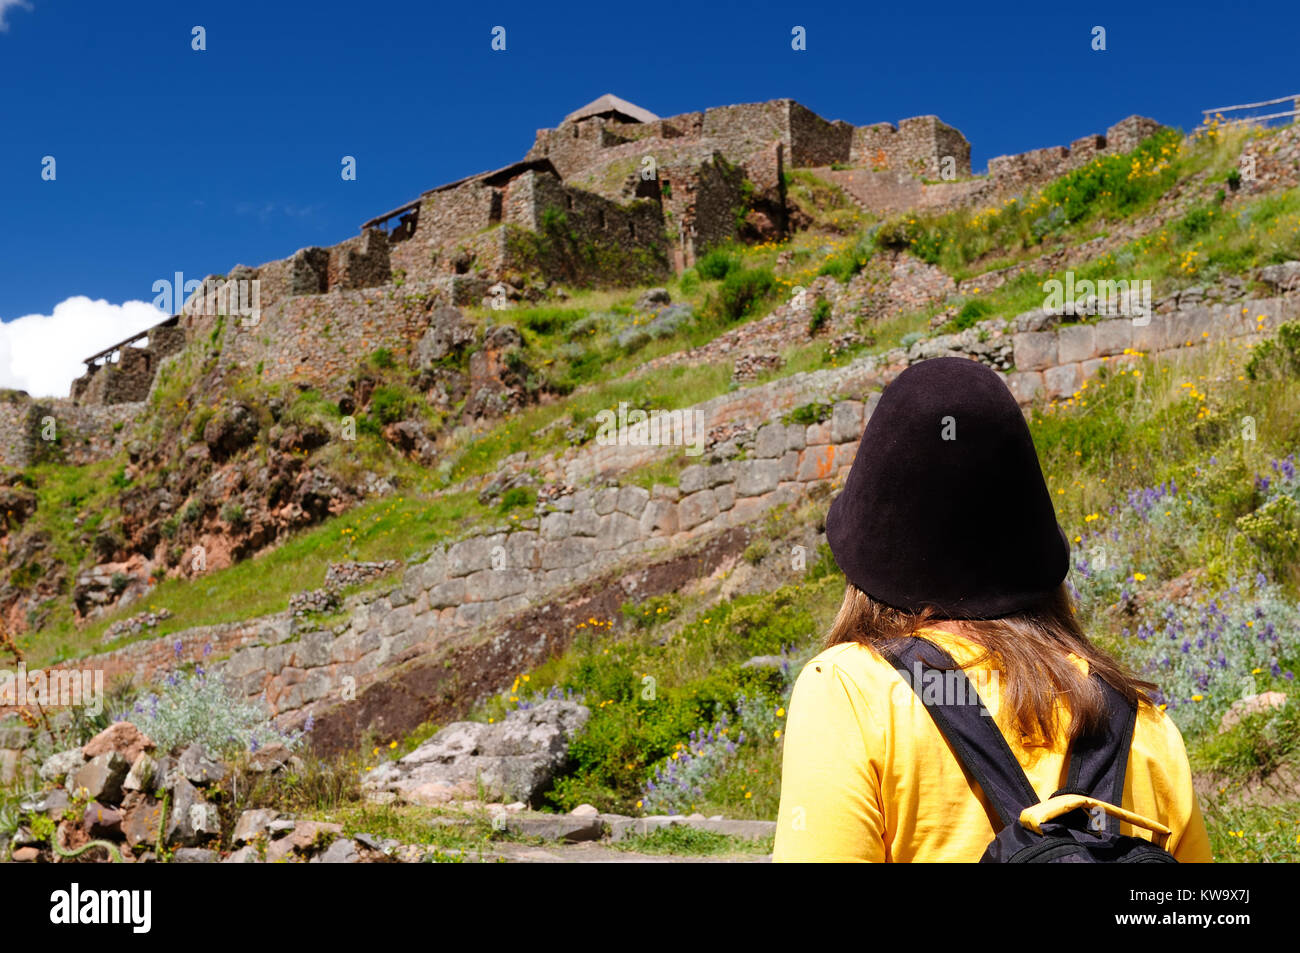 The tourist in South America is touring ancient ruins Stock Photo